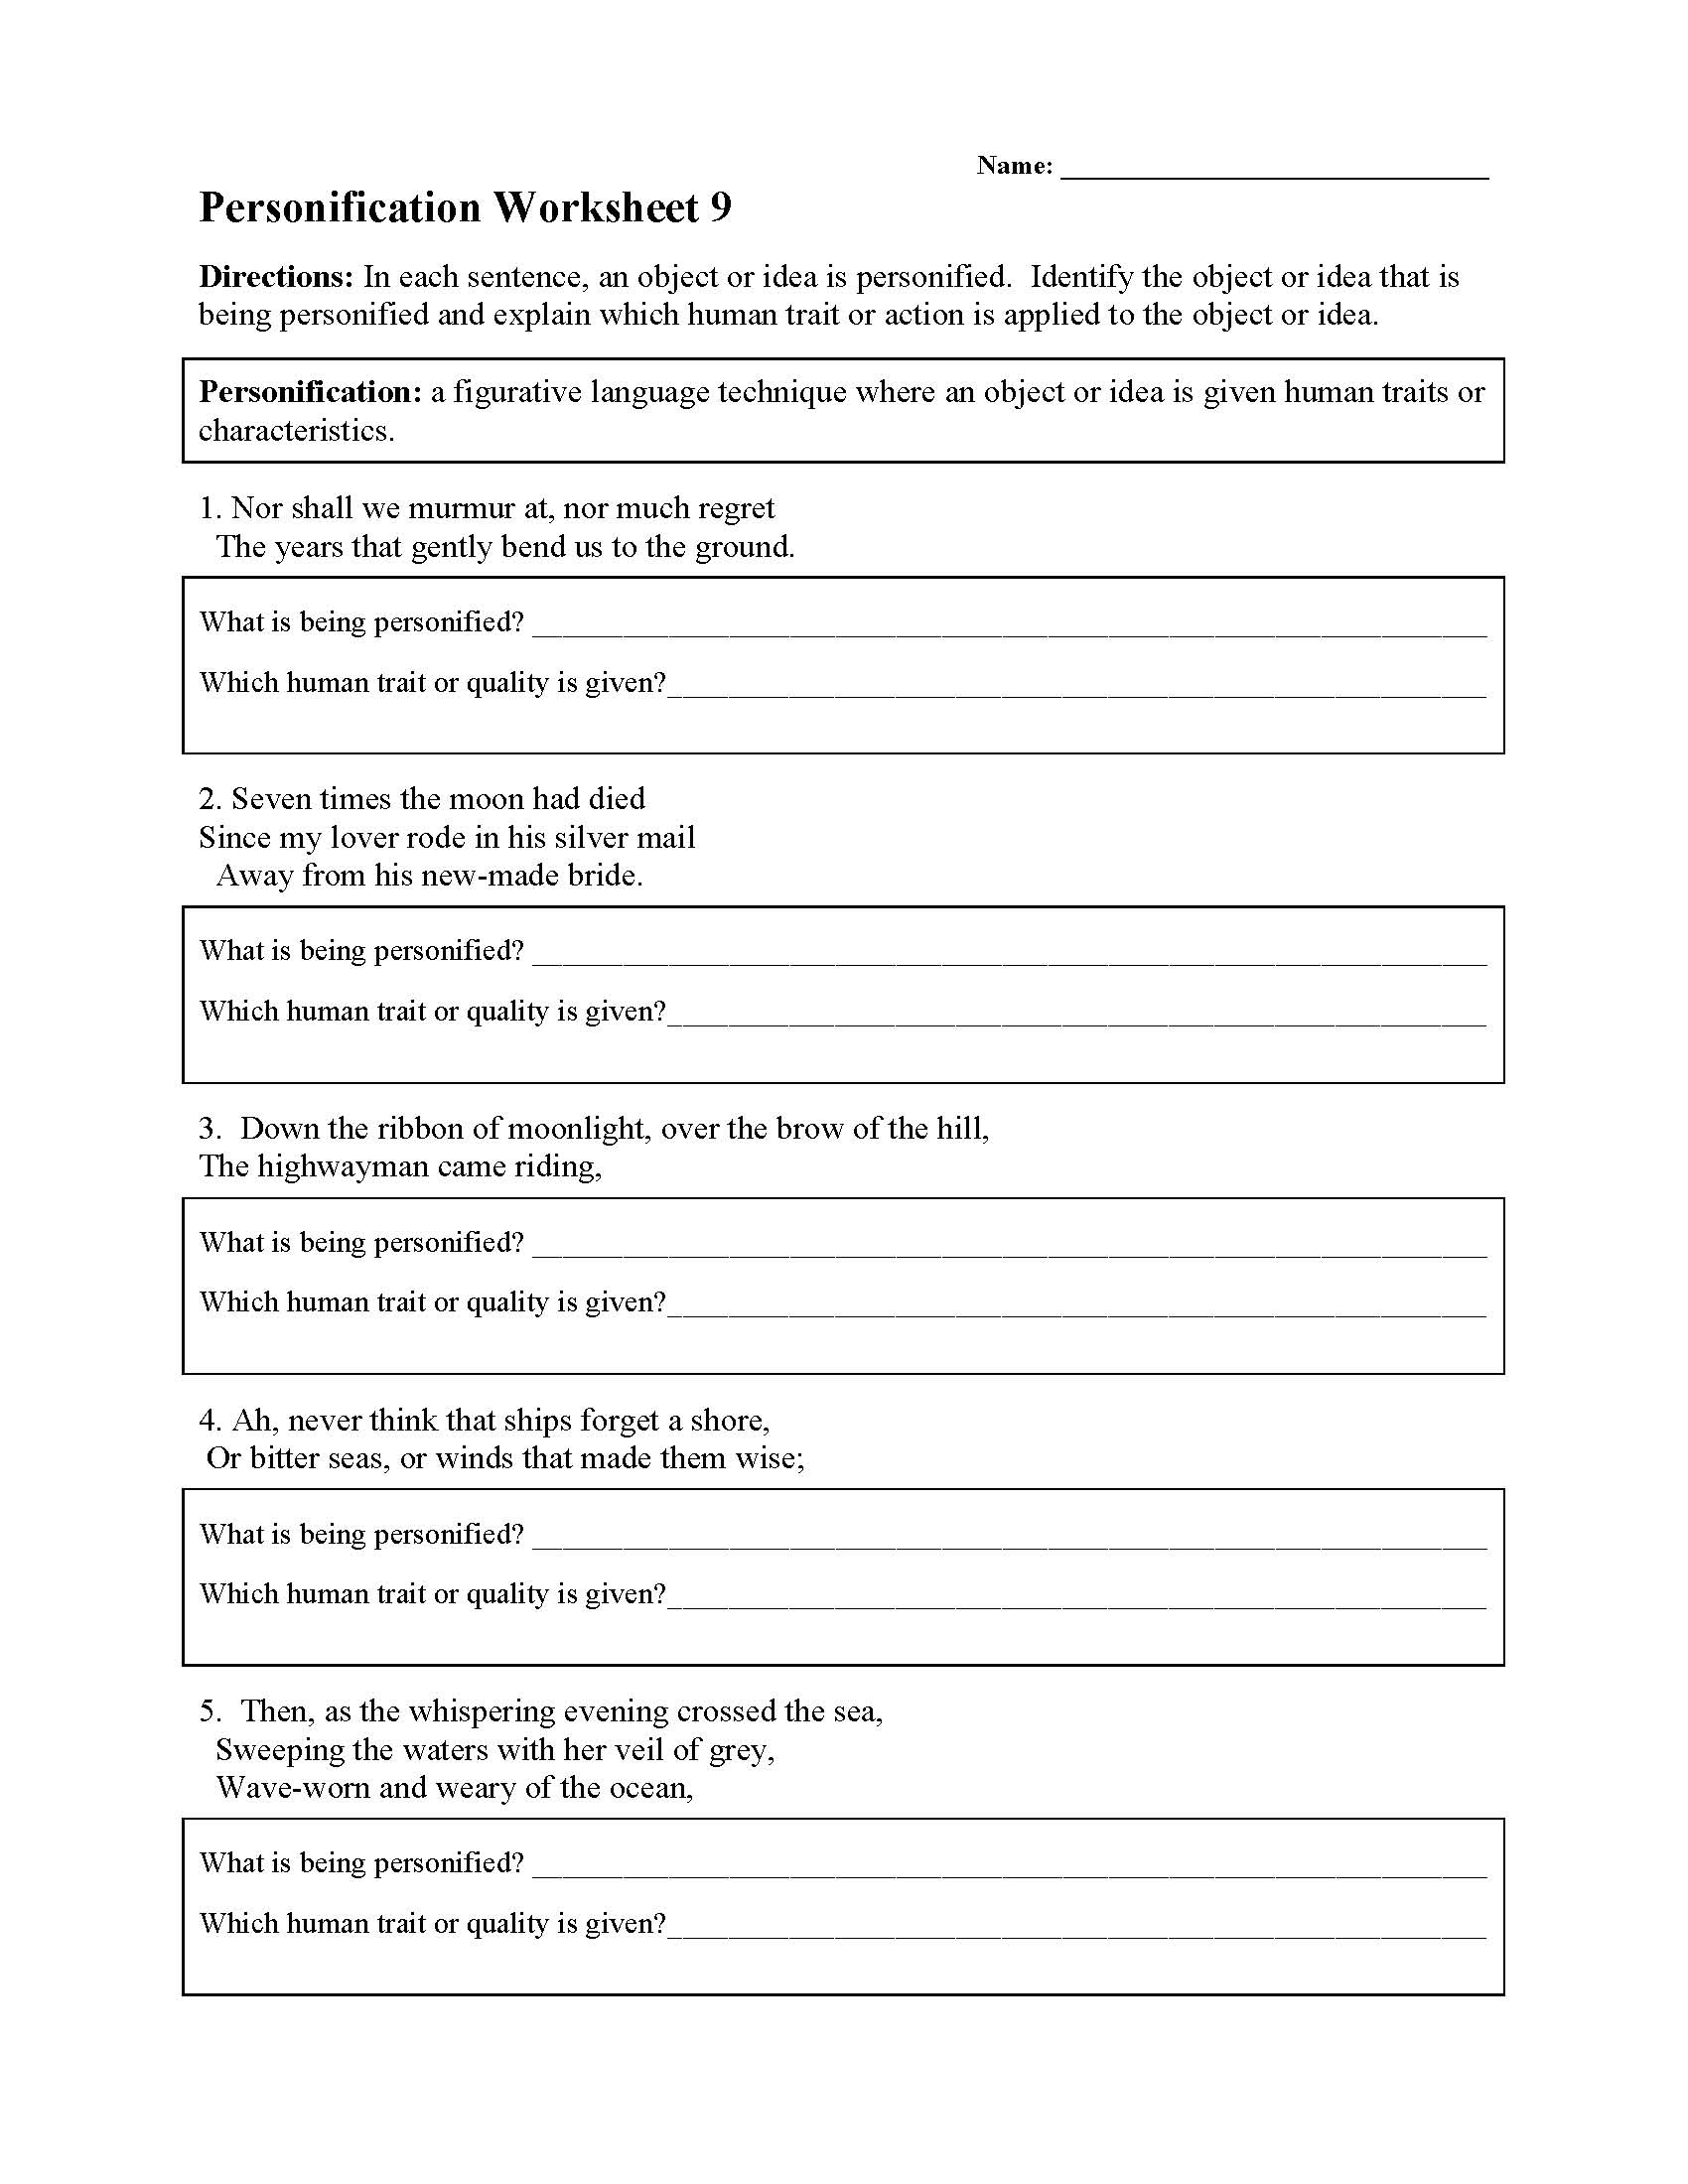 personification-worksheets-for-kids-quiana-web